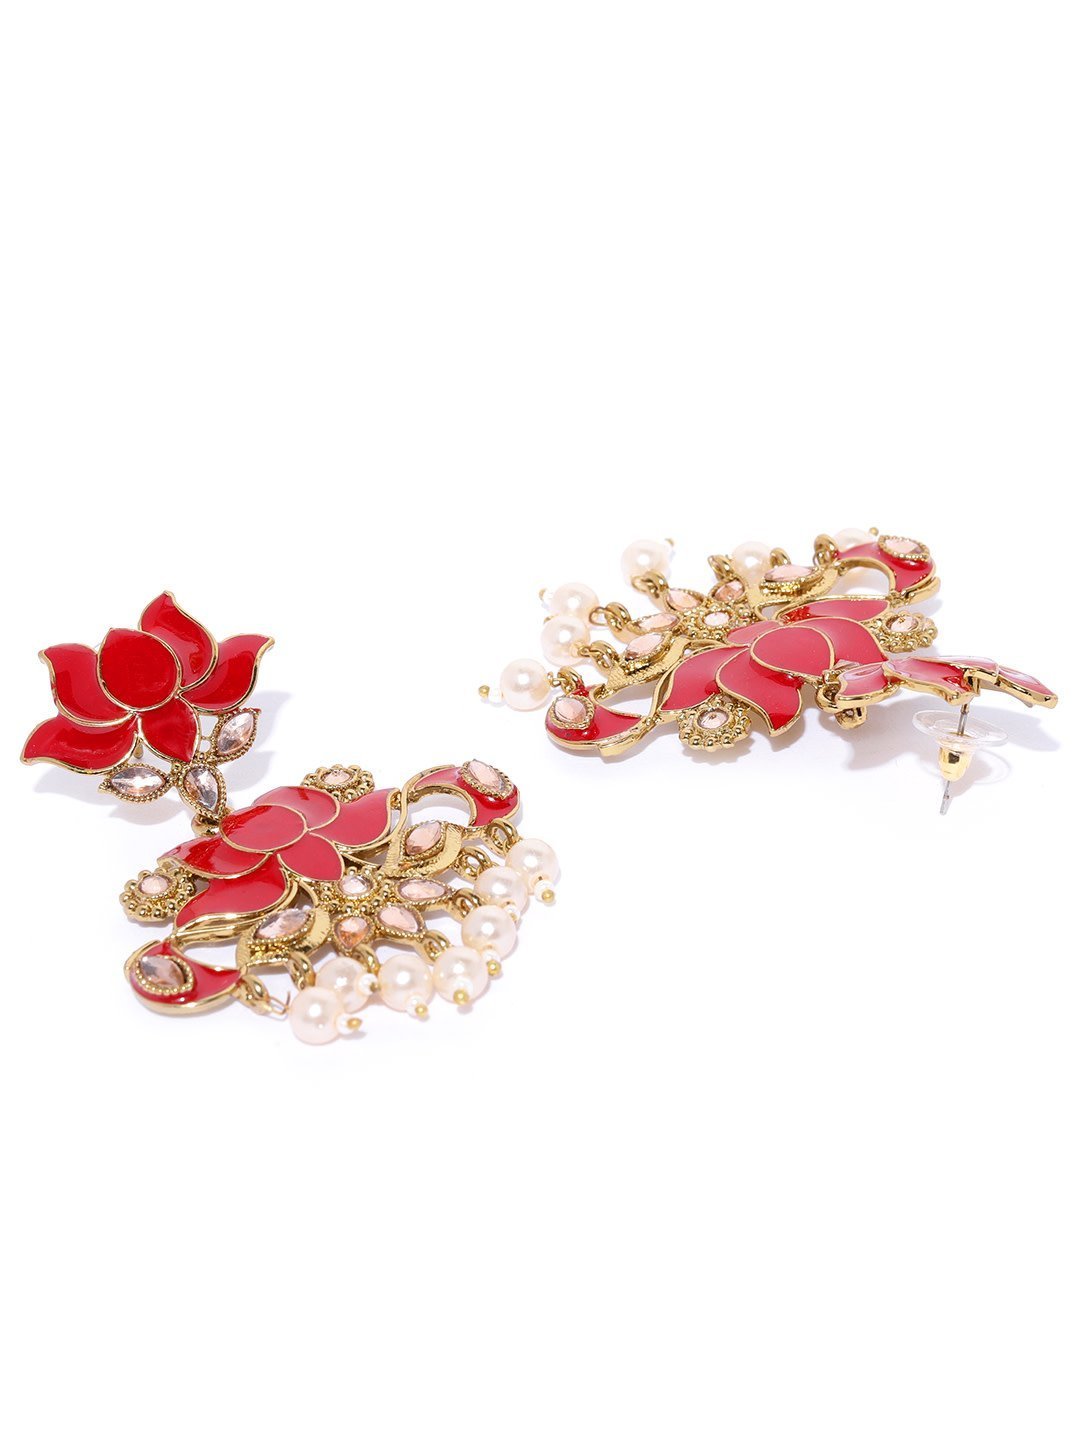 Women's Gold-Plated Stones Studded, Lotus Patterned Meenakari Drop Earring in Red Color with Pearls Drop - Priyaasi